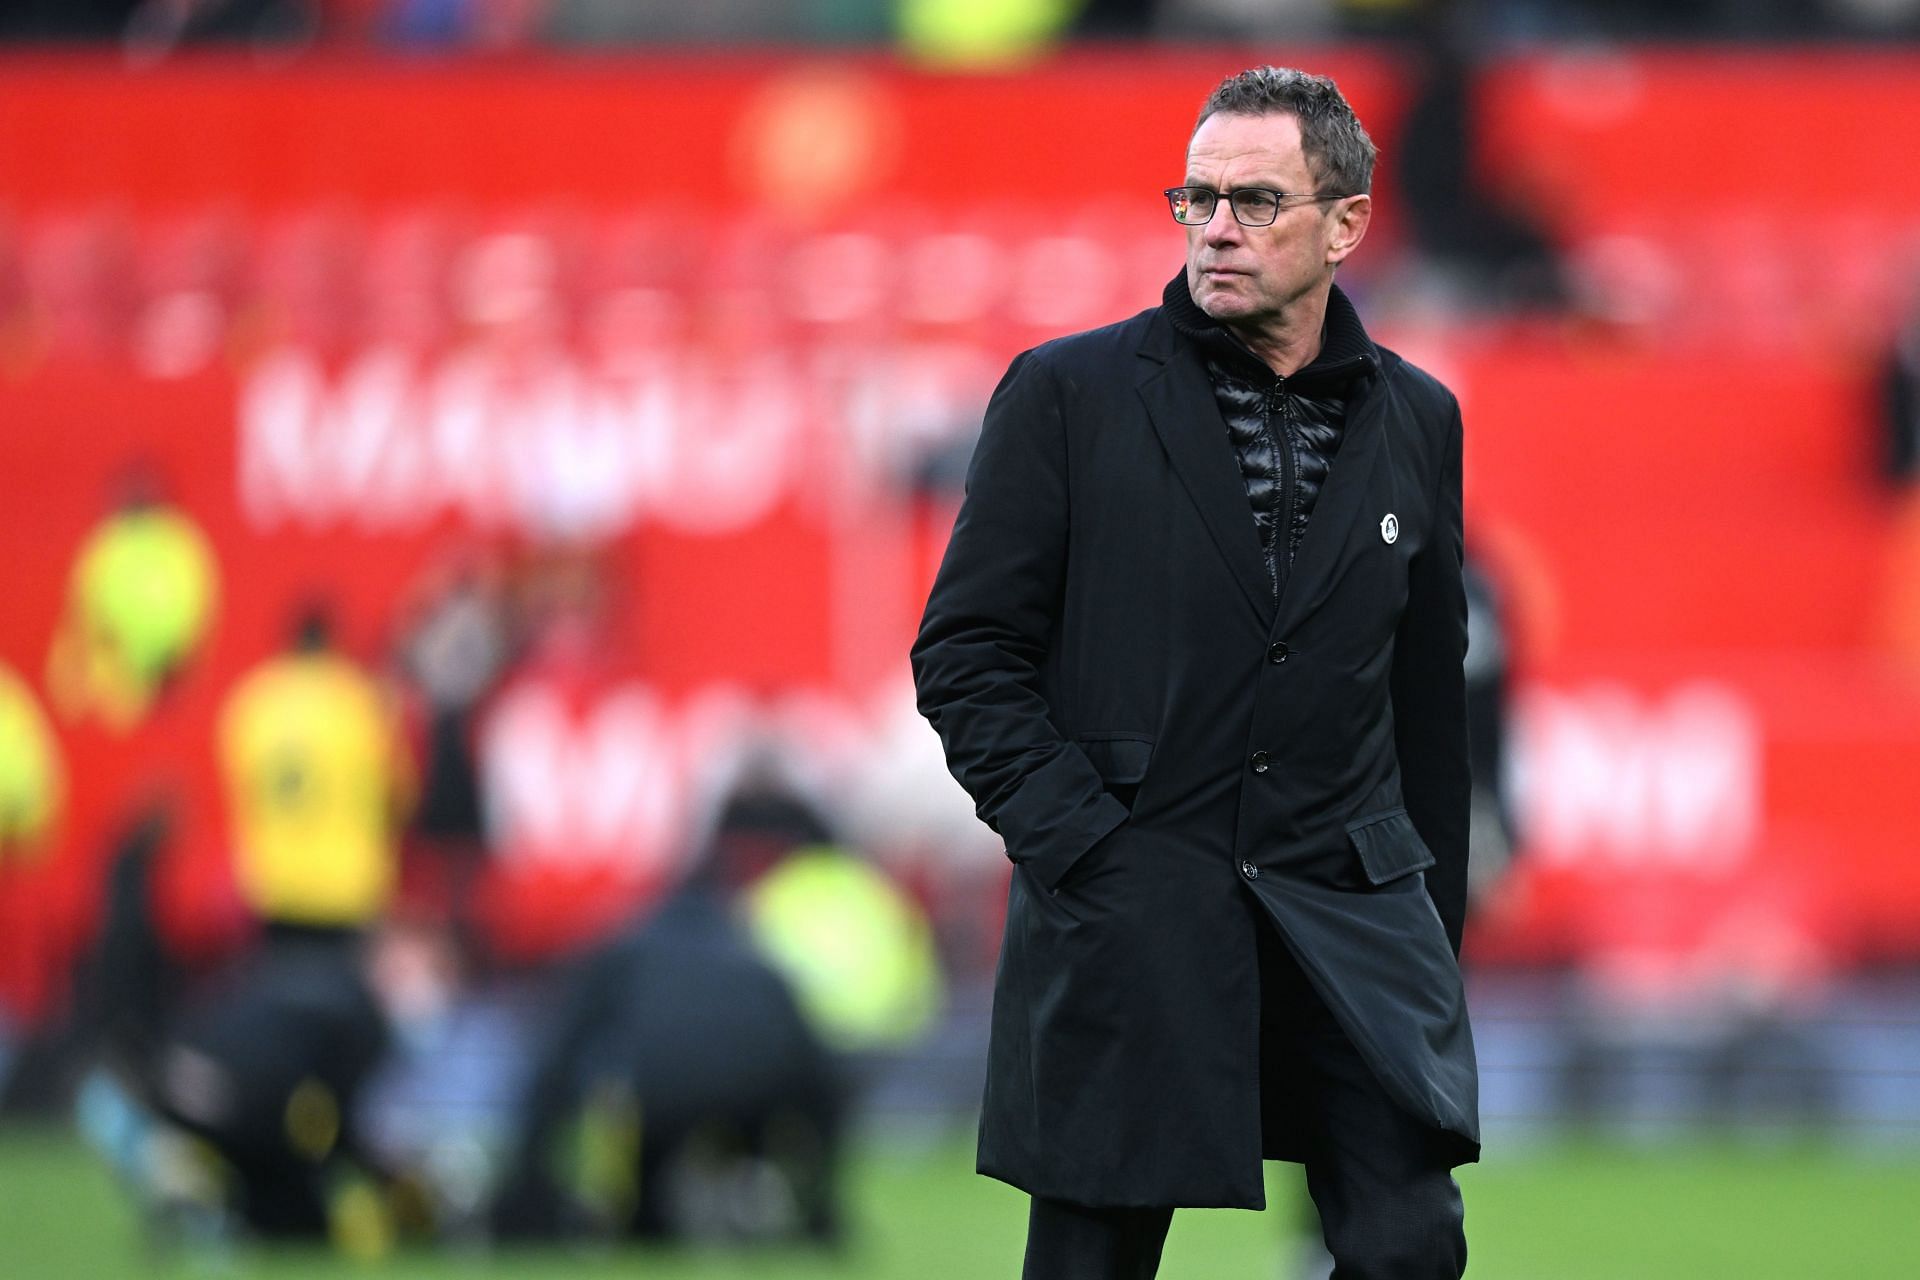 Manchester United are currently under an interim manager in Ralf Rangnick